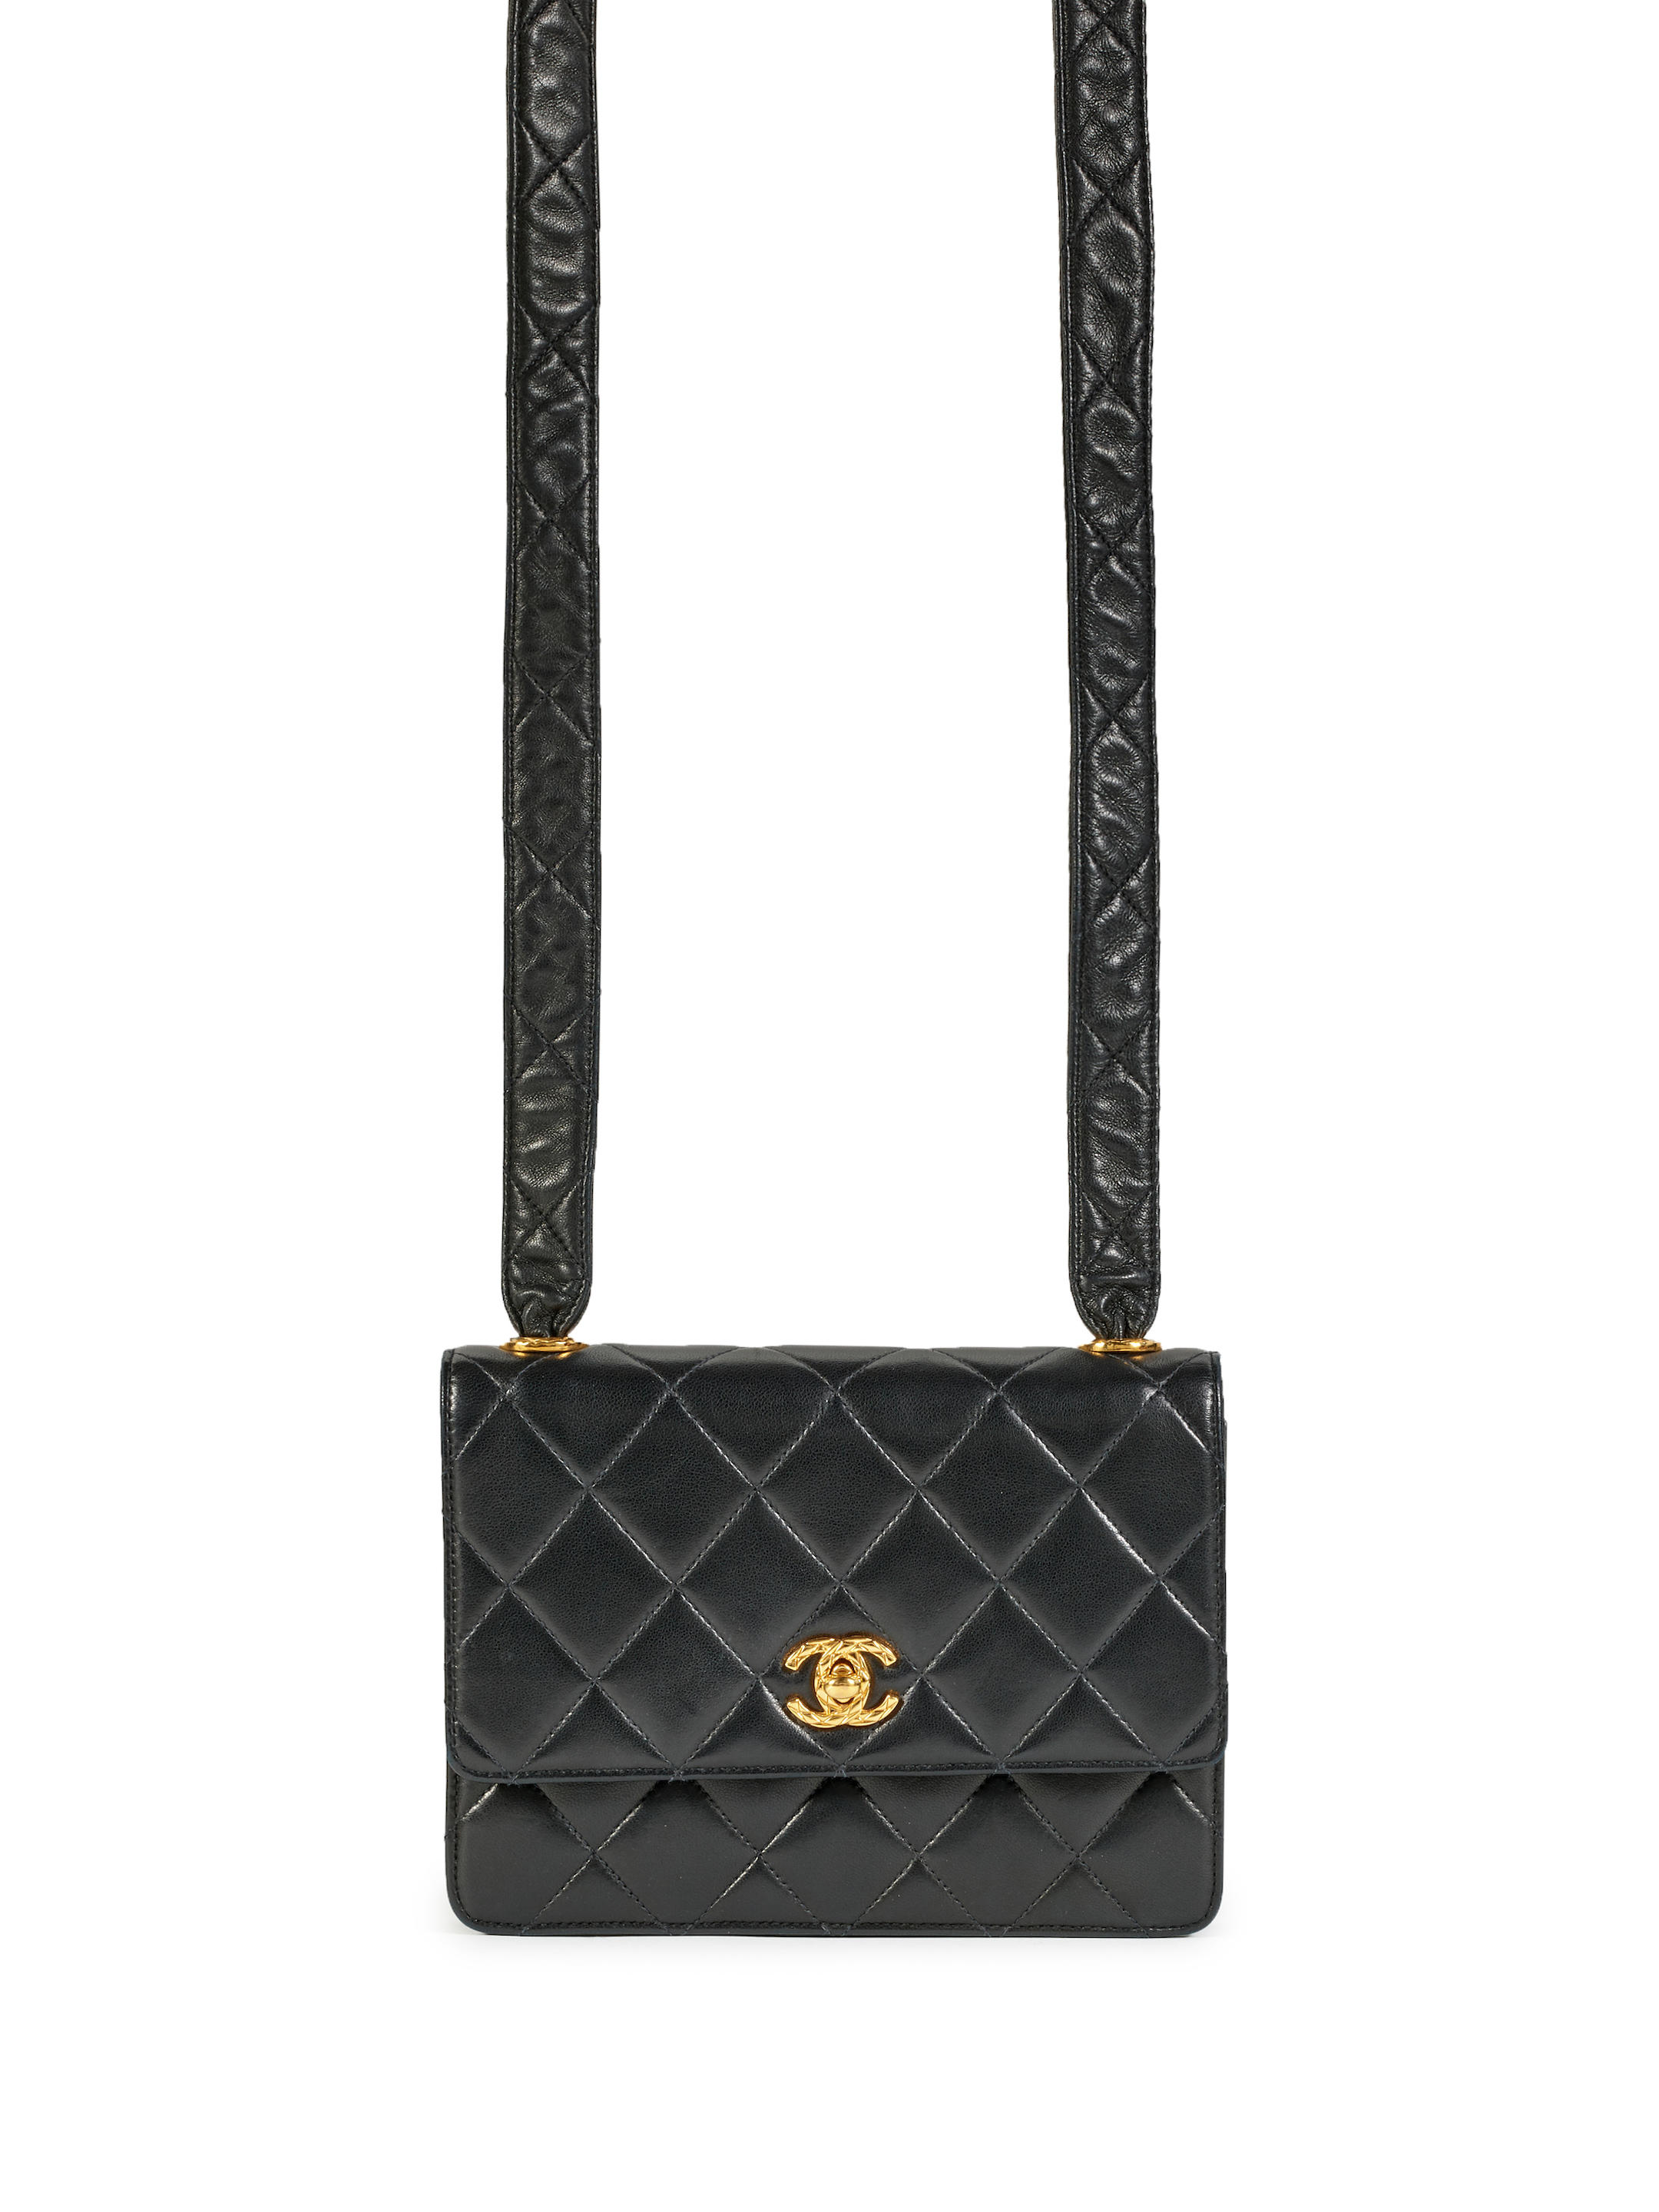 Chanel Pre-owned 2002 CC Stitch Quilted Shoulder Bag - Black